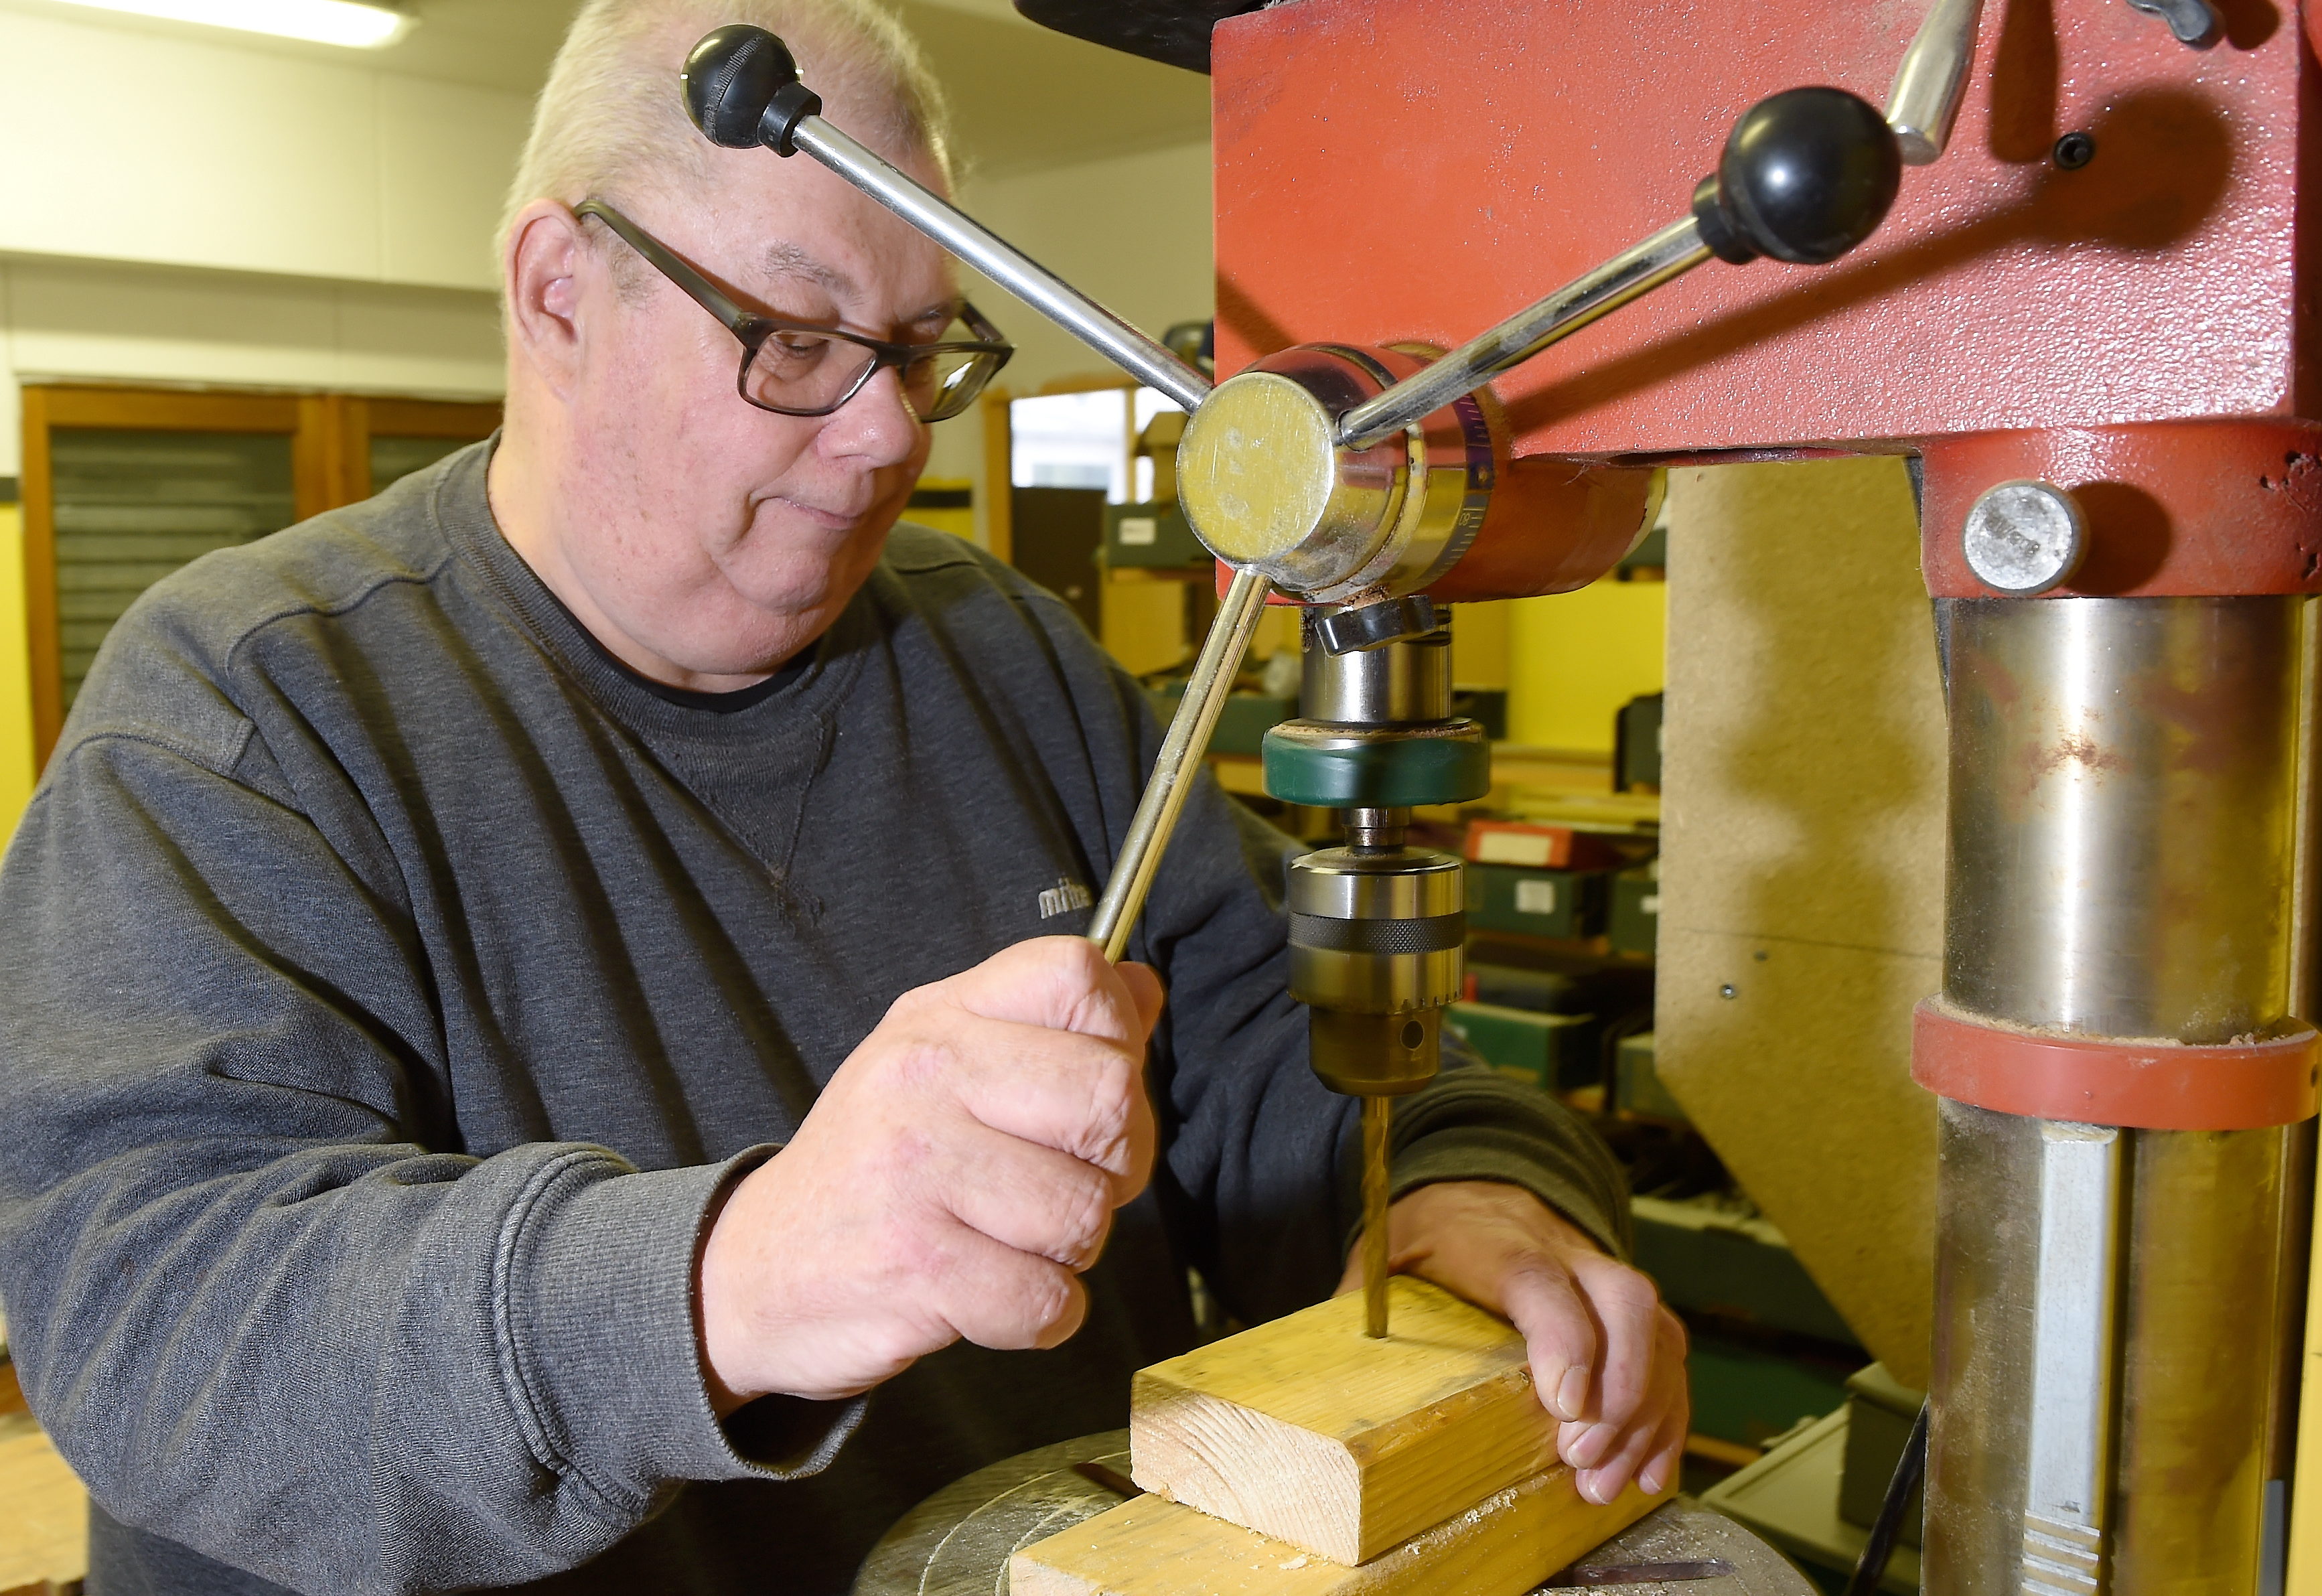 Member Bob Irwin at work on the drill press. Picture by Sandy McCook